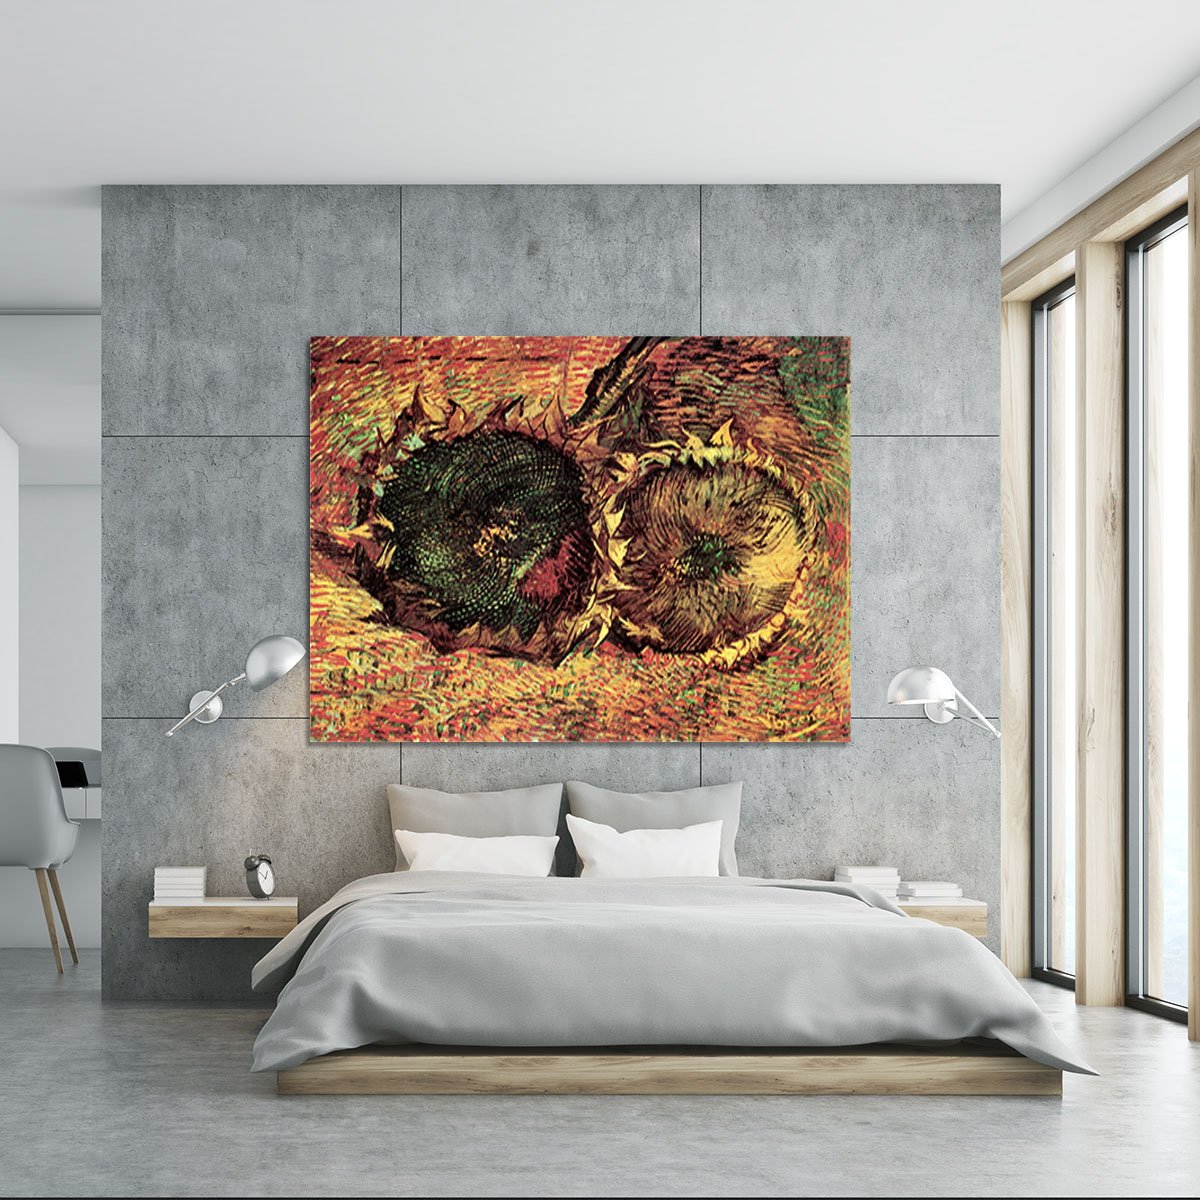 Two Cut Sunflowers 2 by Van Gogh Canvas Print or Poster